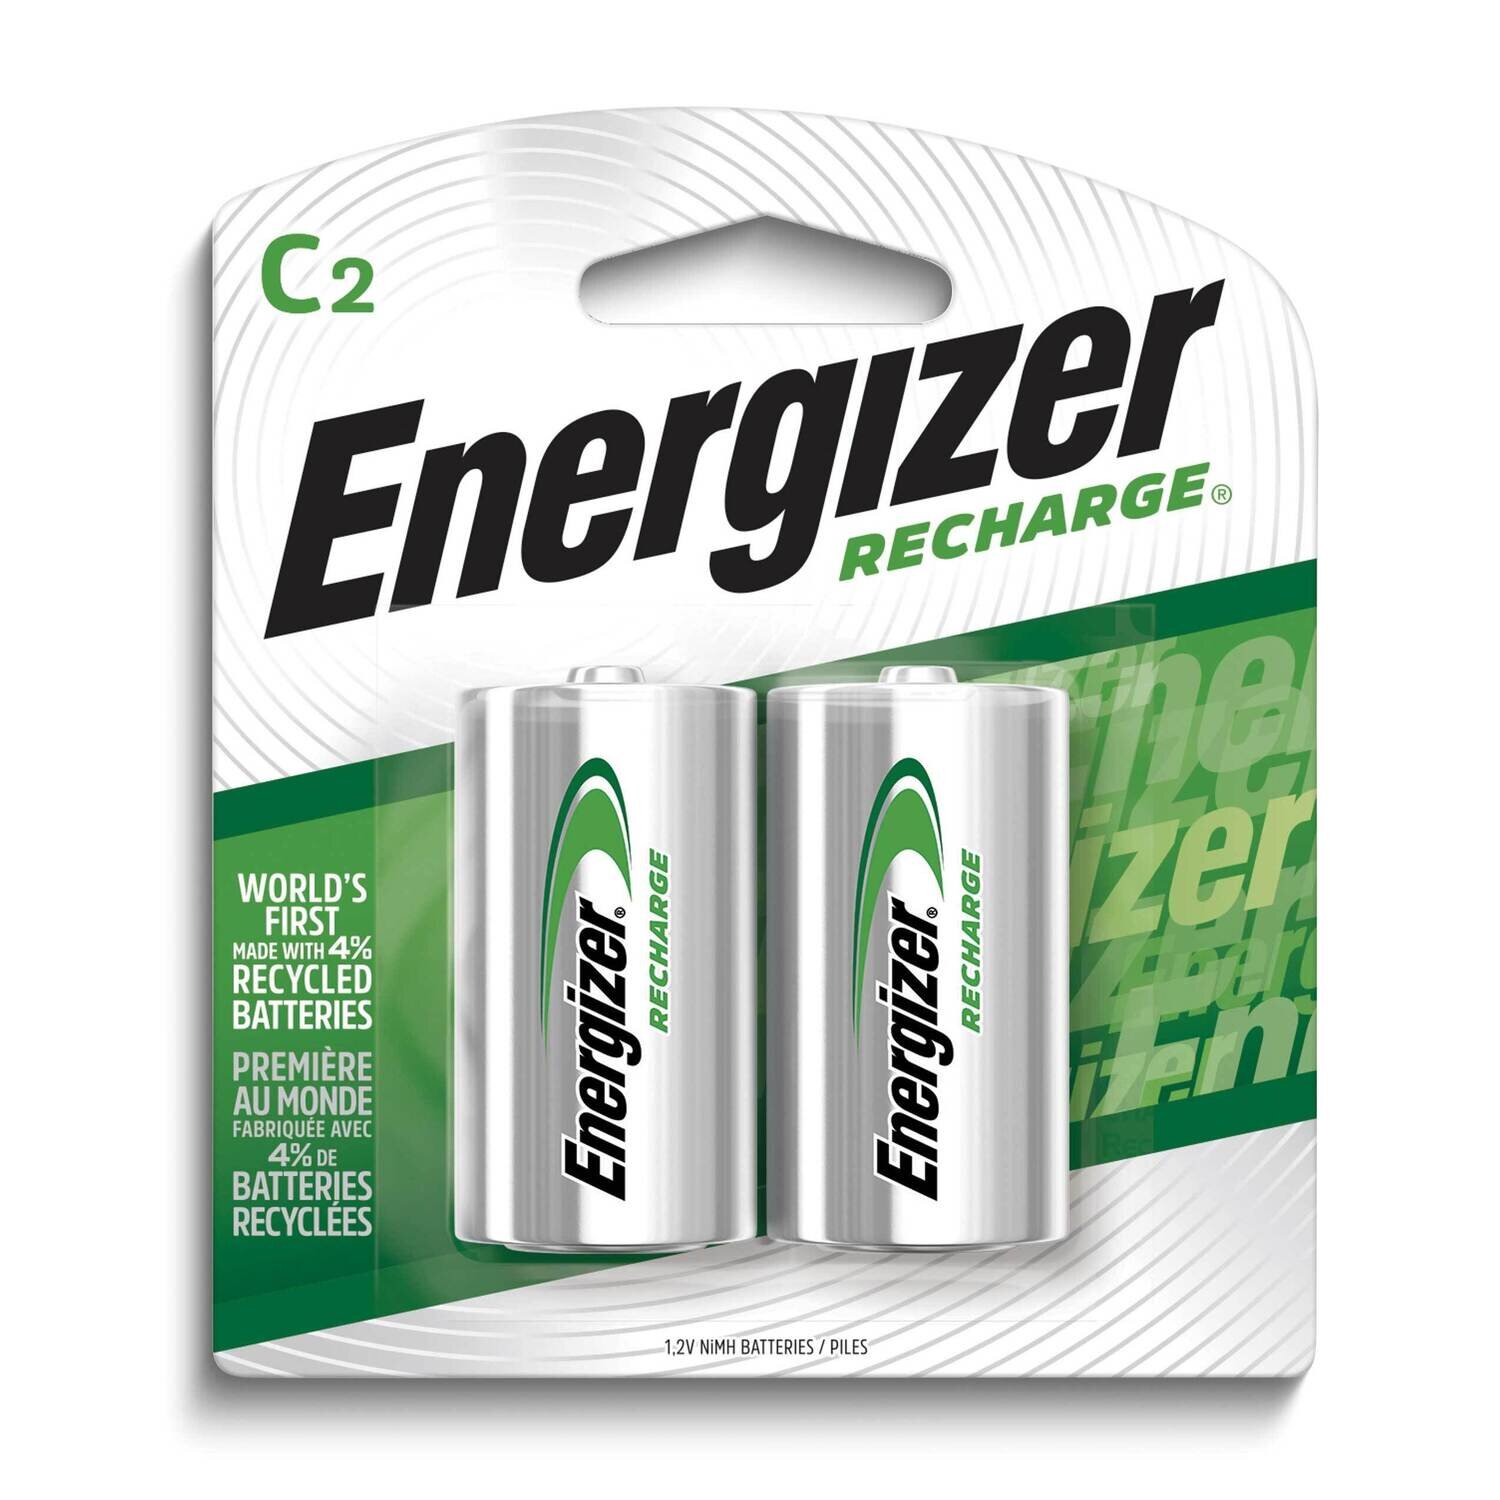 Energizer Recharge Universal Rechargeable C Batteries Pack of 2 WBCR/2